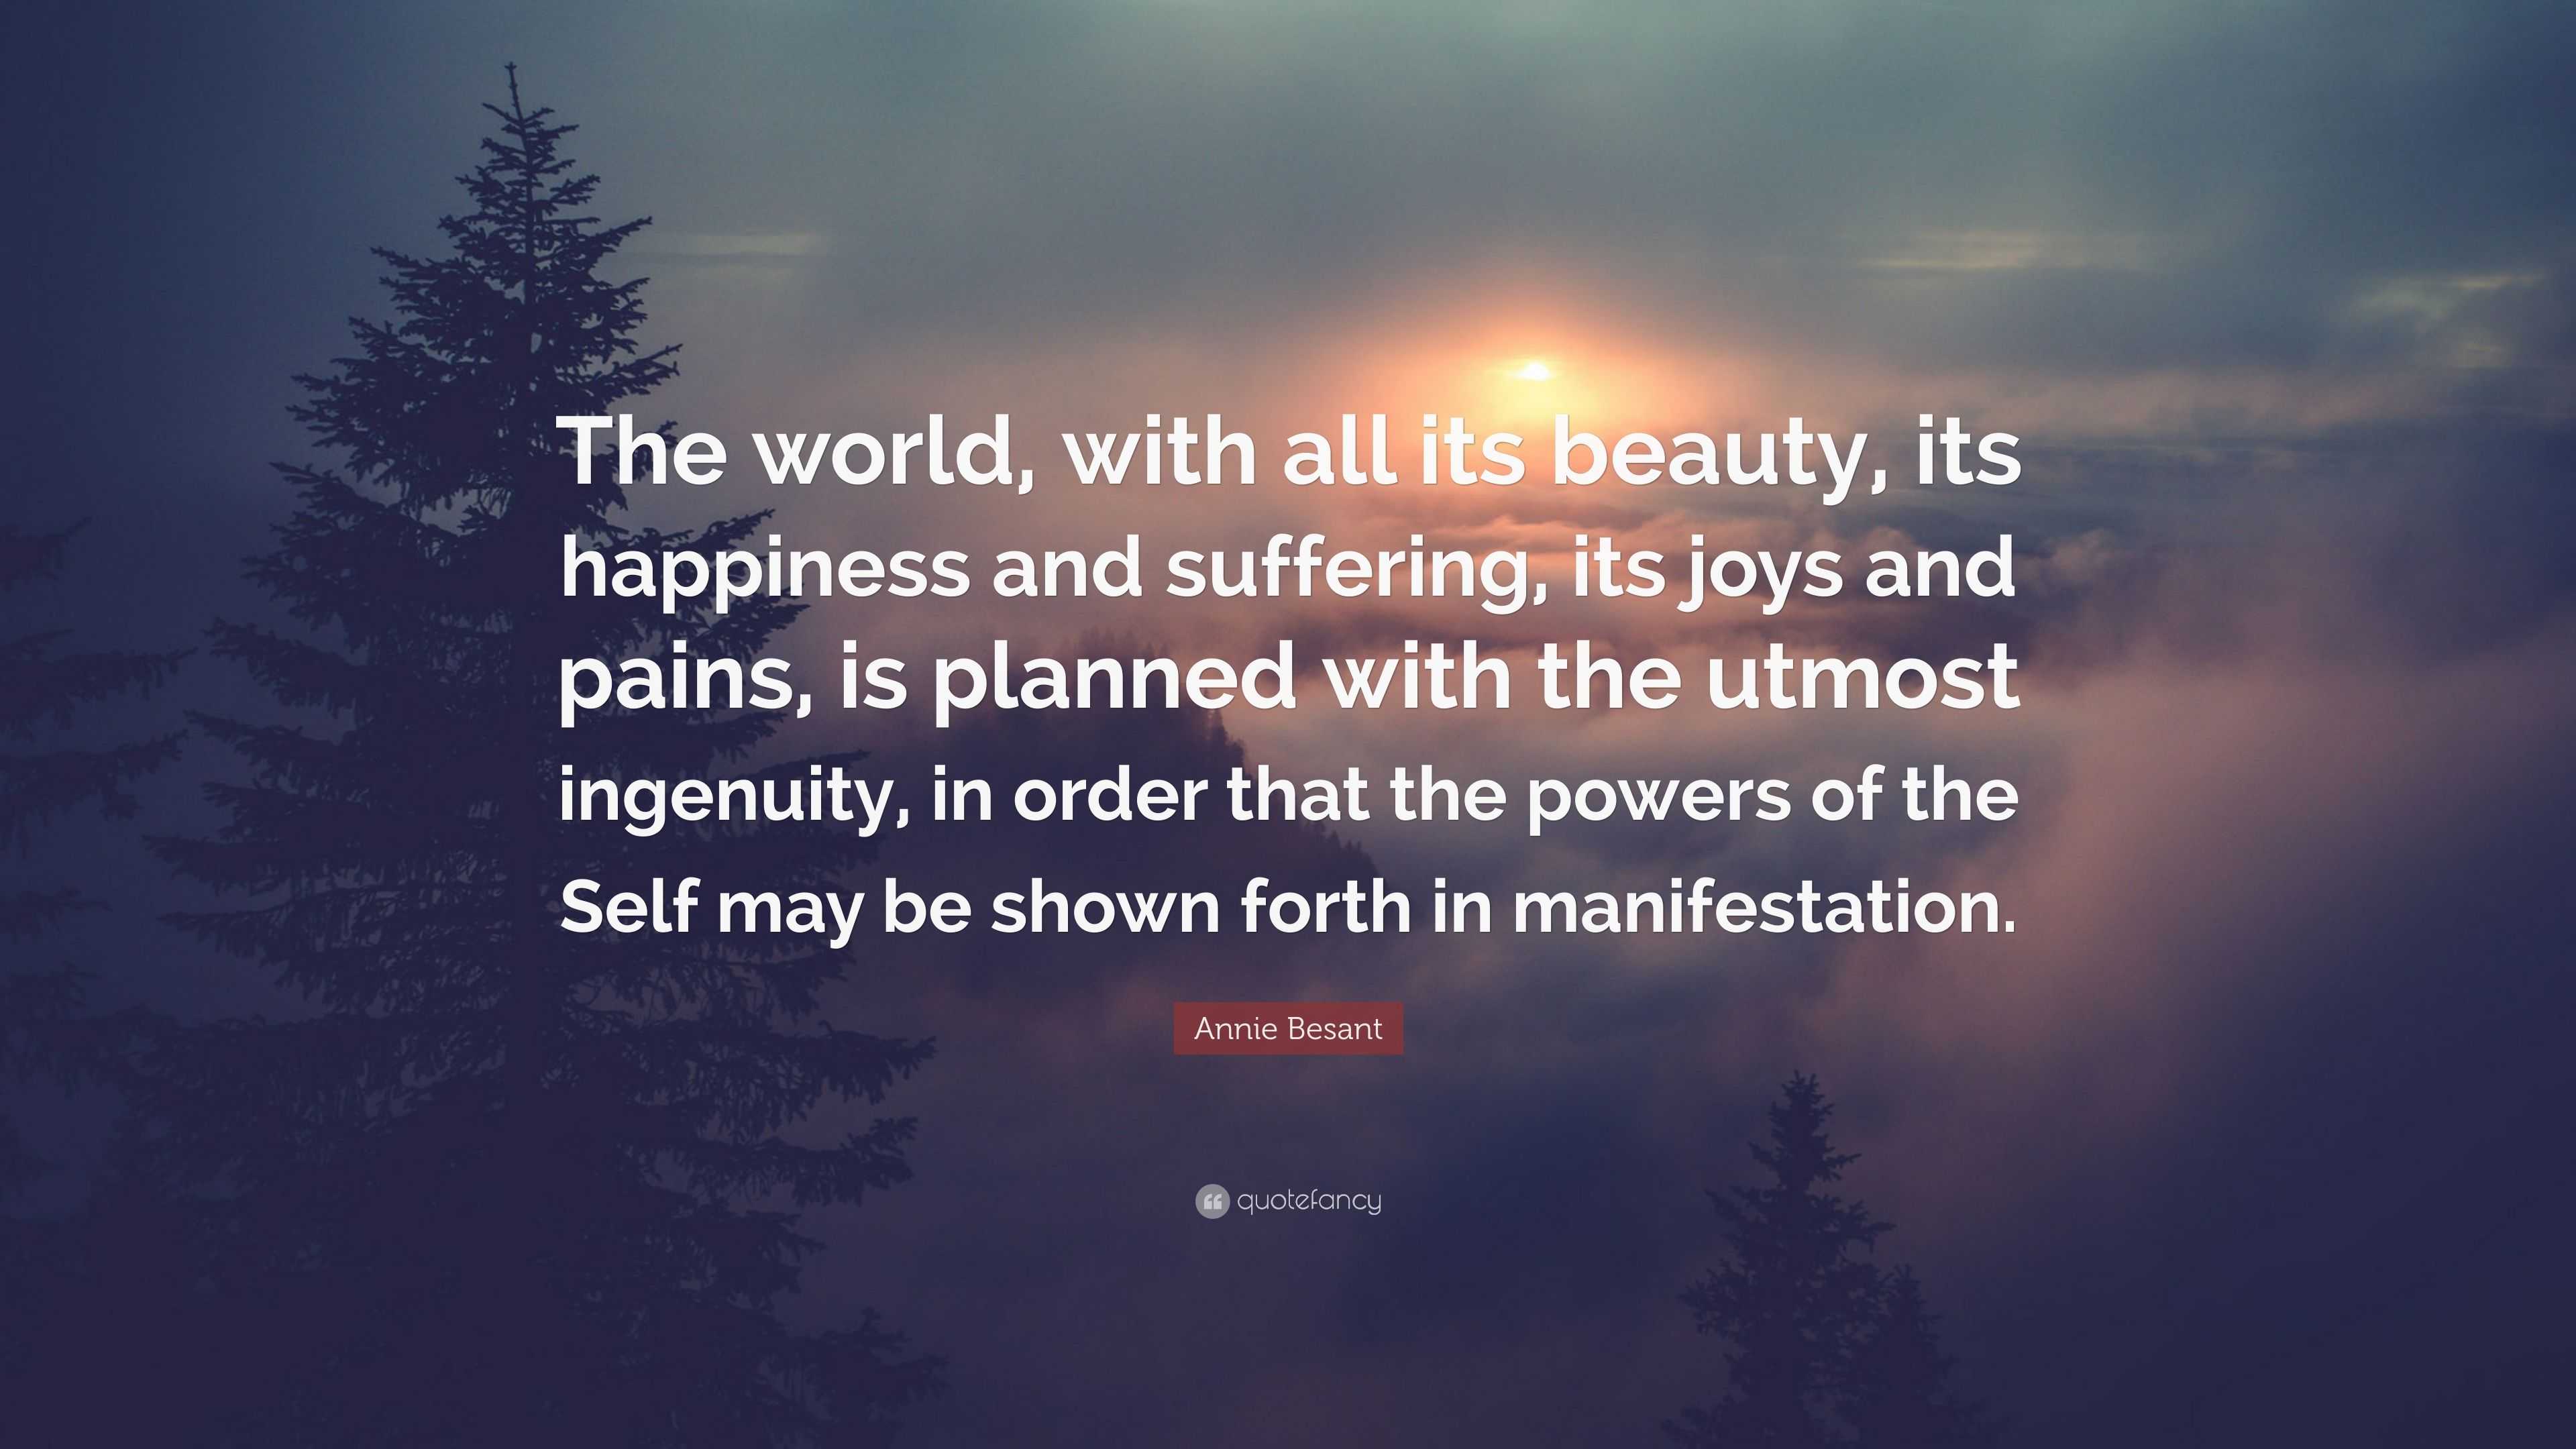 Annie Besant Quote: “The world, with all its beauty, its happiness and ...